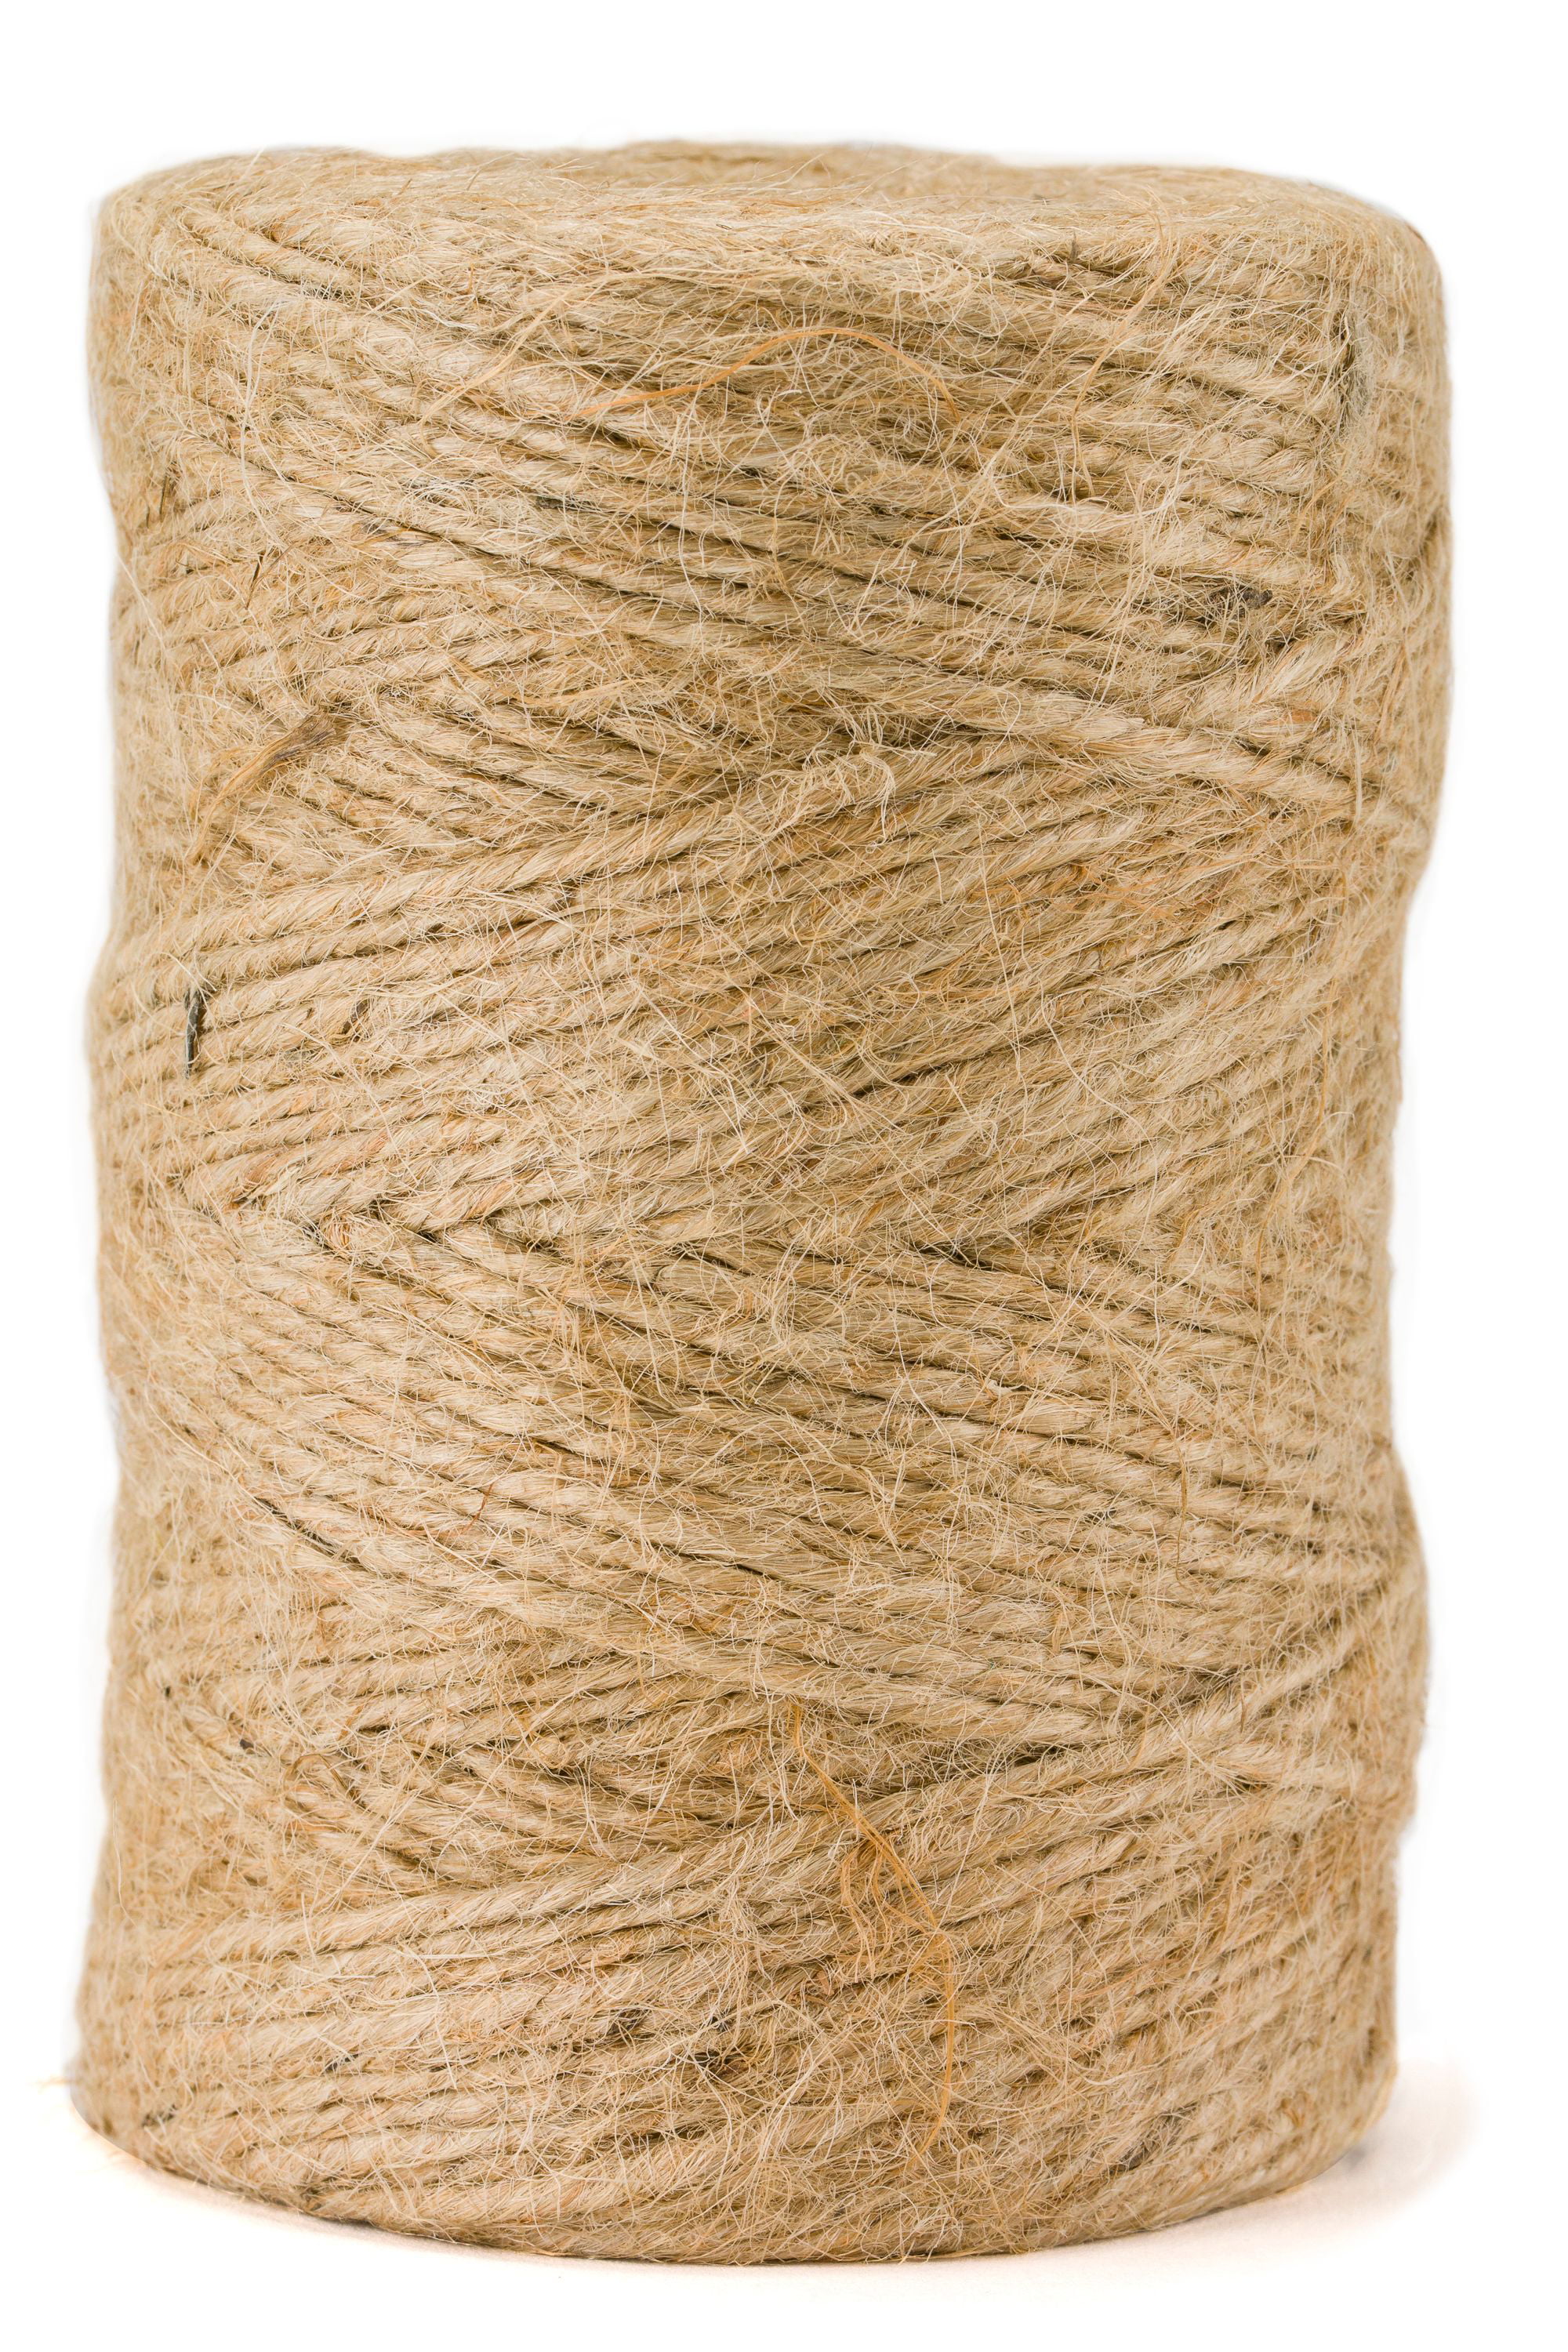 JUTE TWINE 450 ft  Biodegradable  All Natural  GREAT FOR GARDENING 